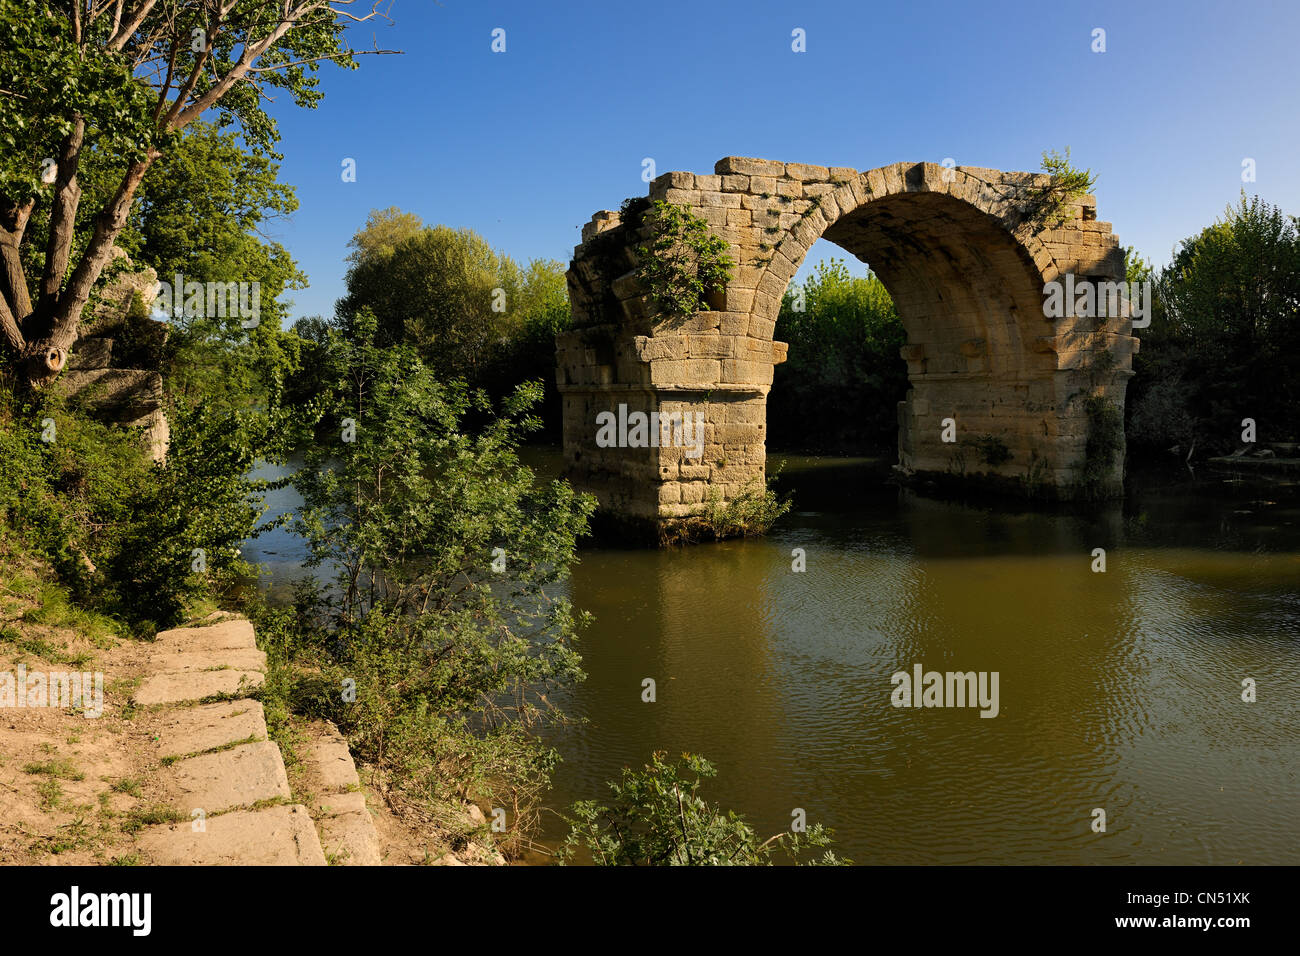 France, Herault, near Lunel, Oppidum of Ambrussum on the Via Domitia, the Pont Ambroix (Ambroix bridge) on the river Vidourle Stock Photo